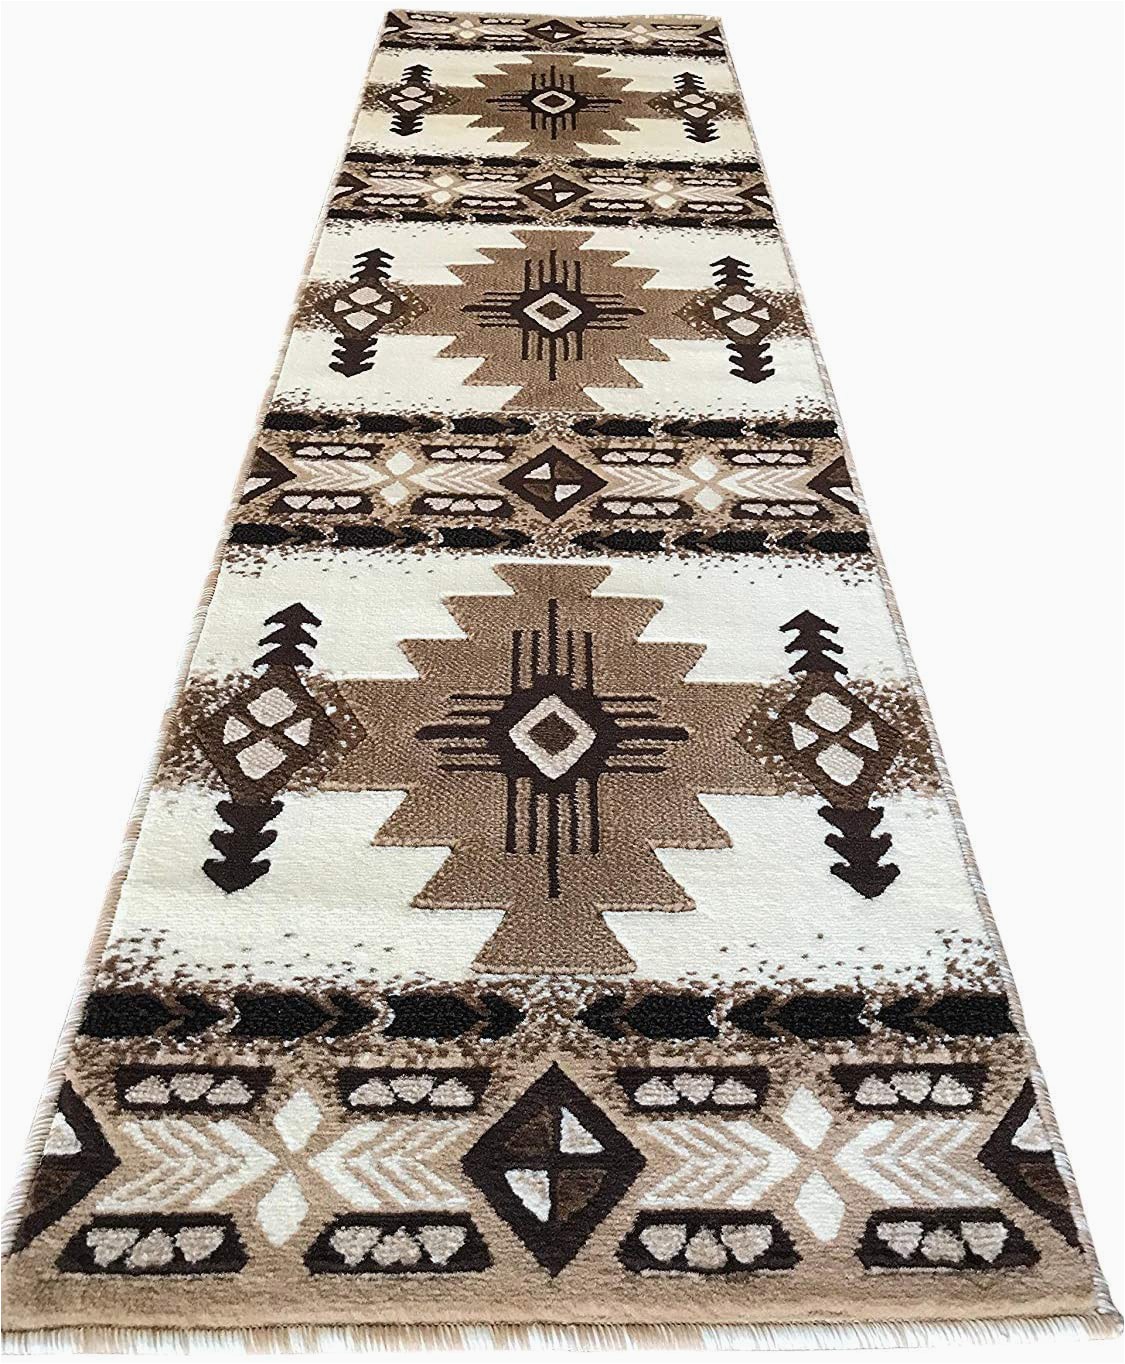 Area Rugs for Sale On Amazon southwest Native American Runner area Rug Indian Ivory Concord Design C318 2 Feet X 7 Feet